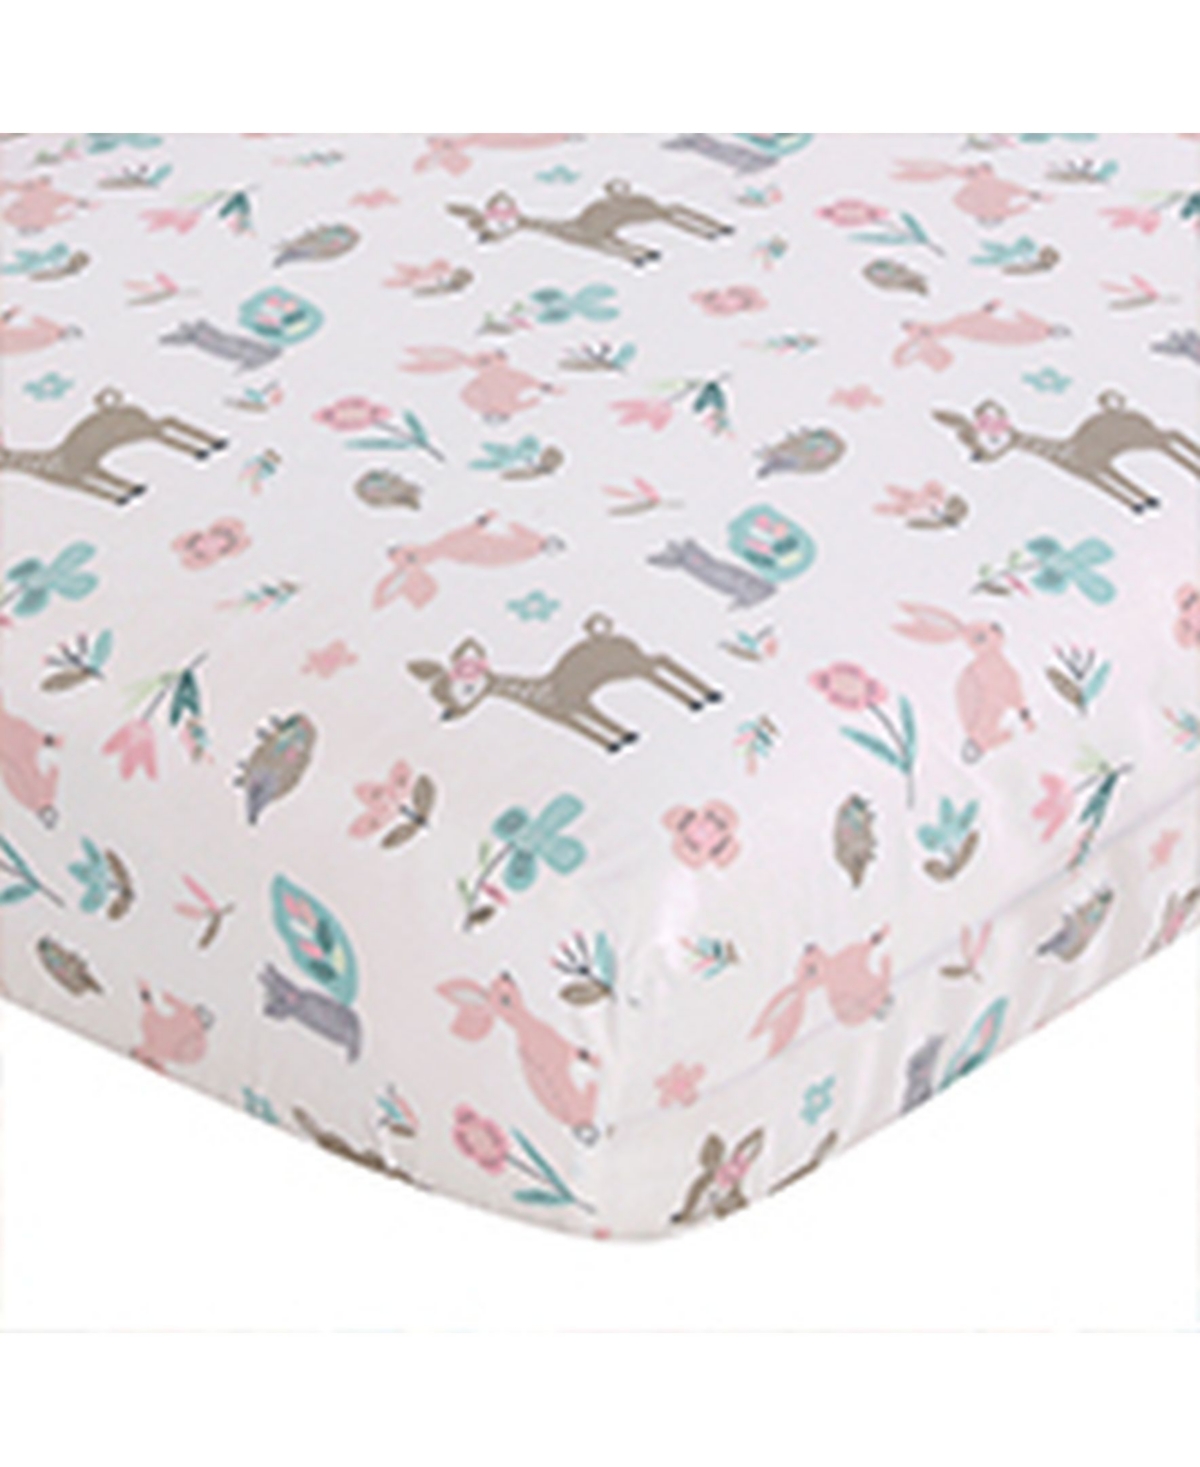 Levtex Baby Everly Crib Fitted Sheet In Blush